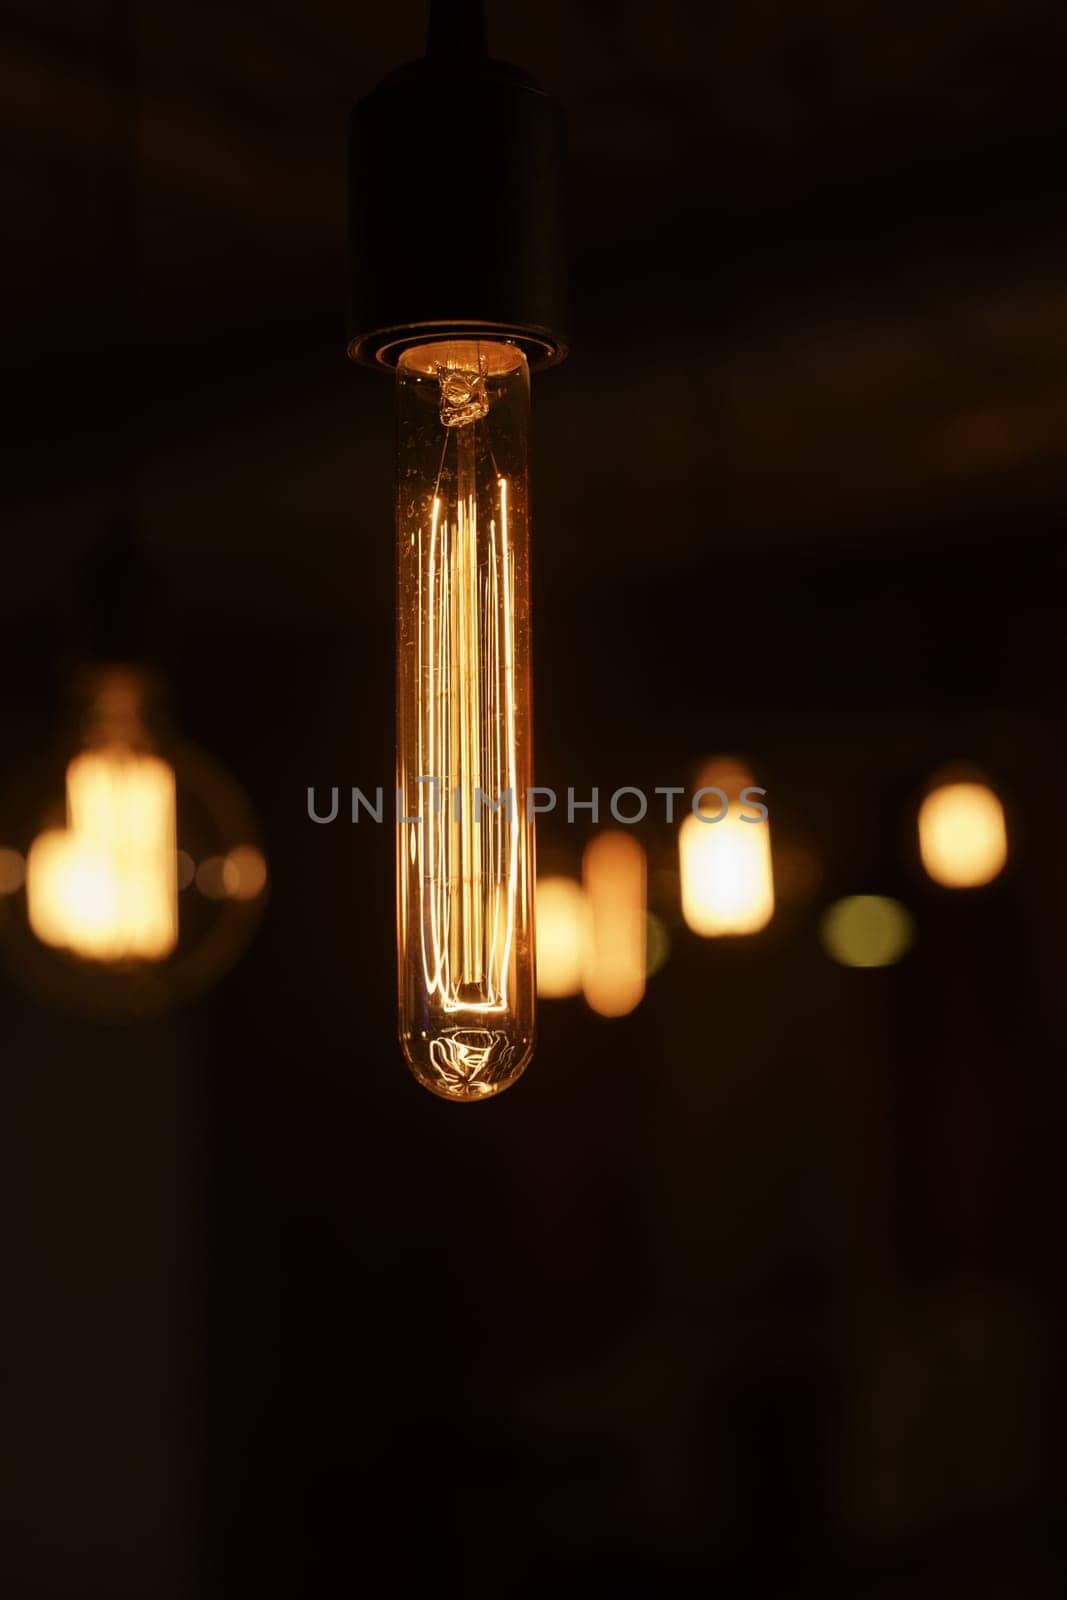 Image of elongated incandescent lamp, blur on background